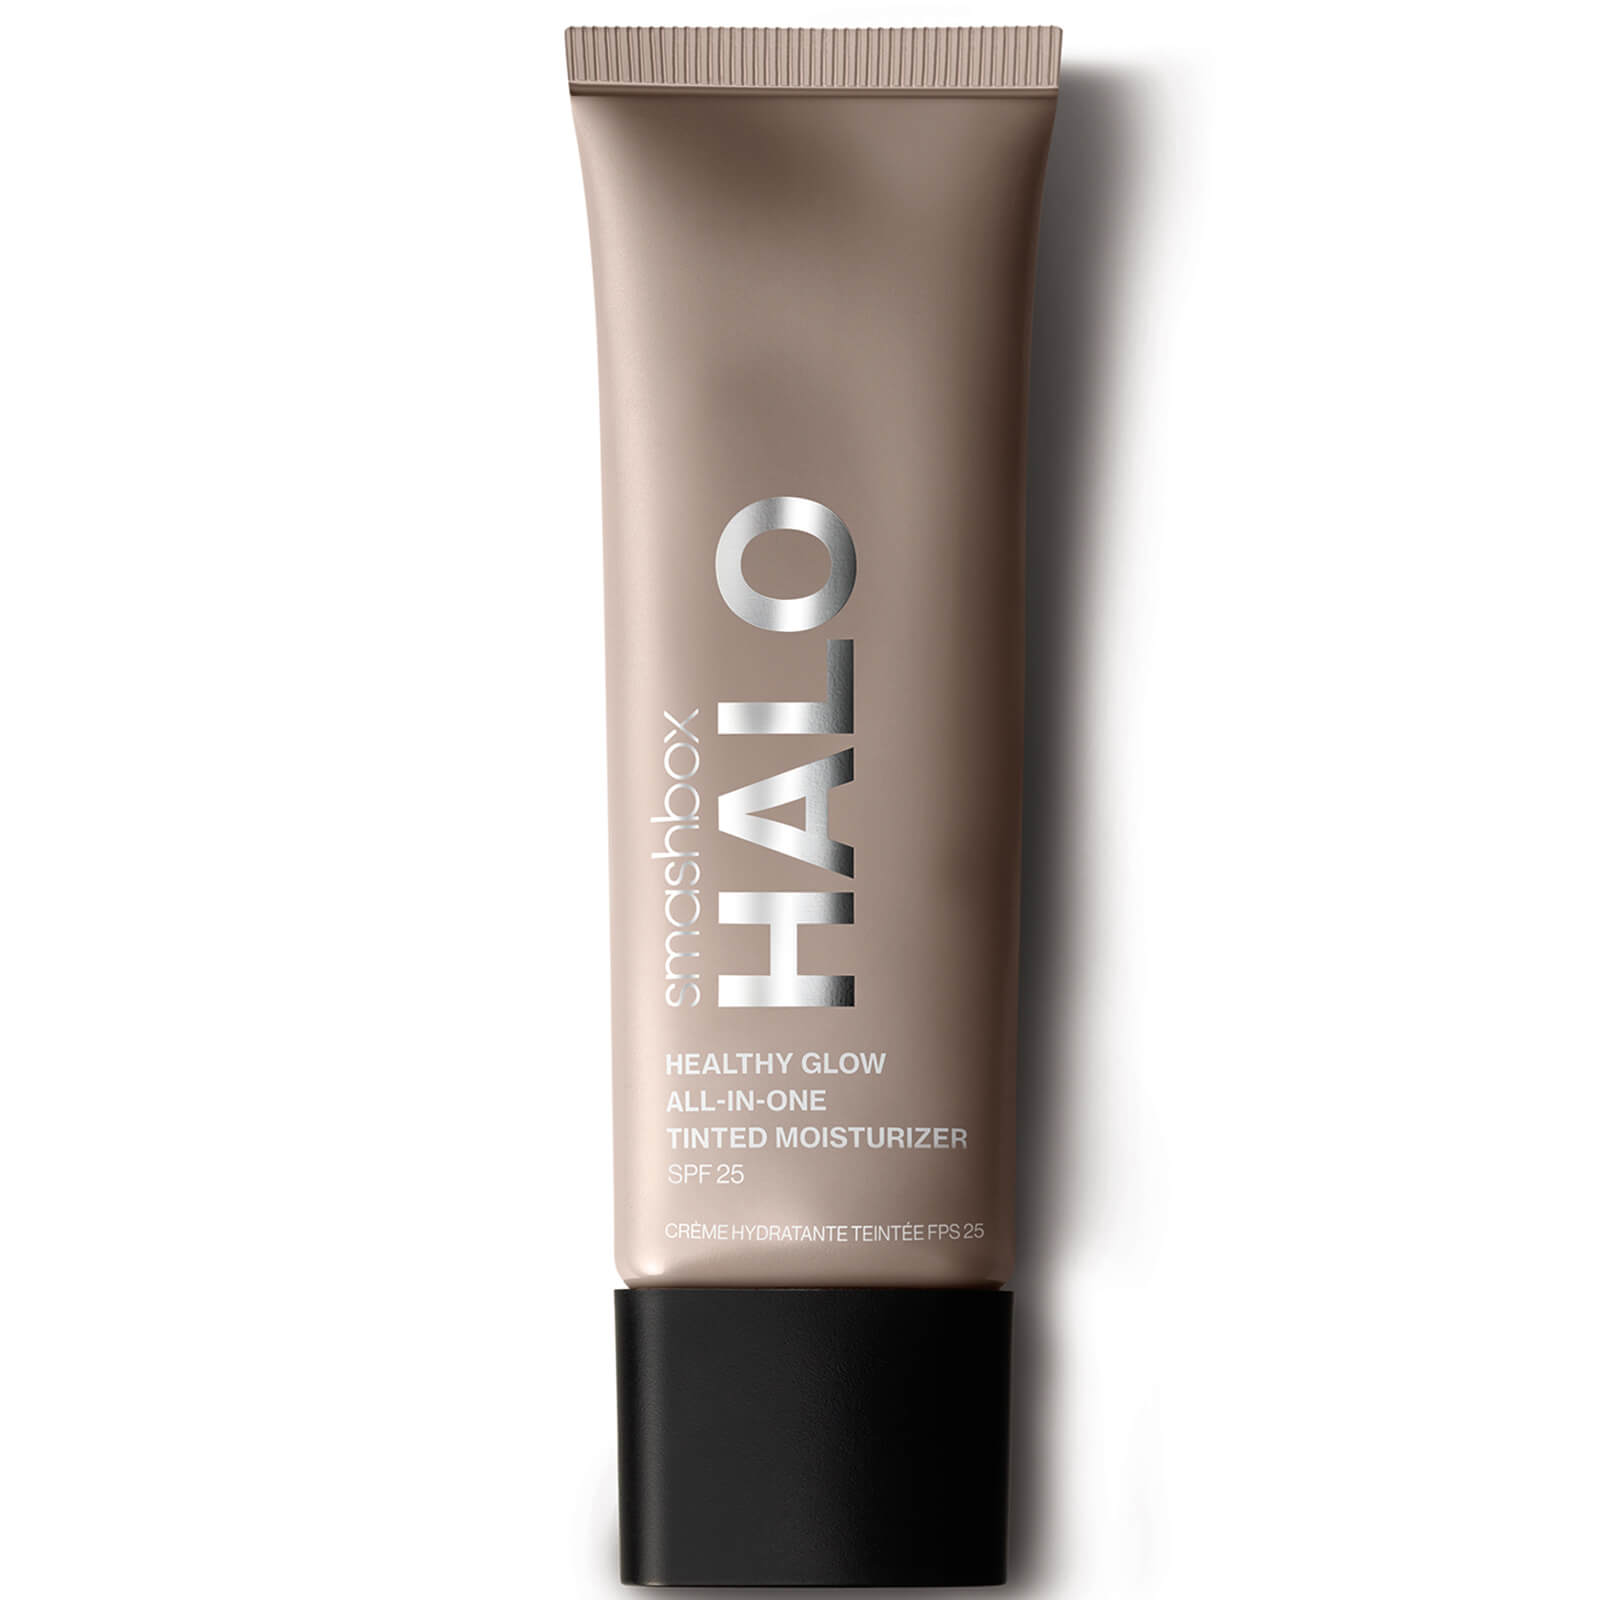 Image of Smashbox Halo Healthy Glow All-in-One SPF25 Tinted Moisturiser 40ml (Various Shades) - Tan Olive